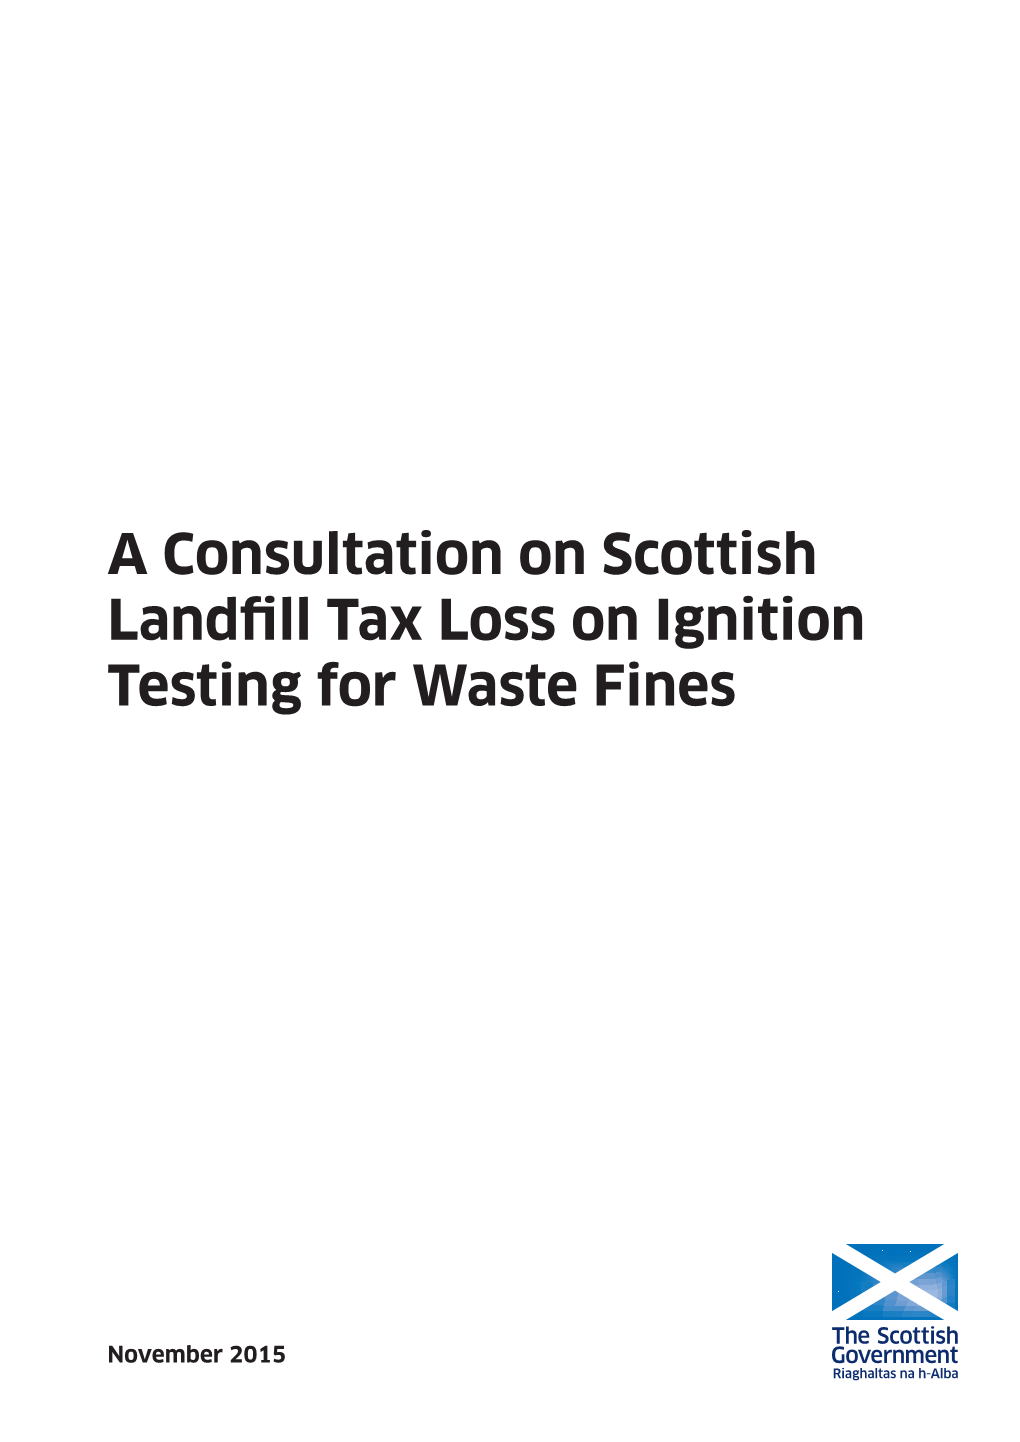 A Consultation on Scottish Landfill Tax Loss on Ignition Testing for Waste Fines